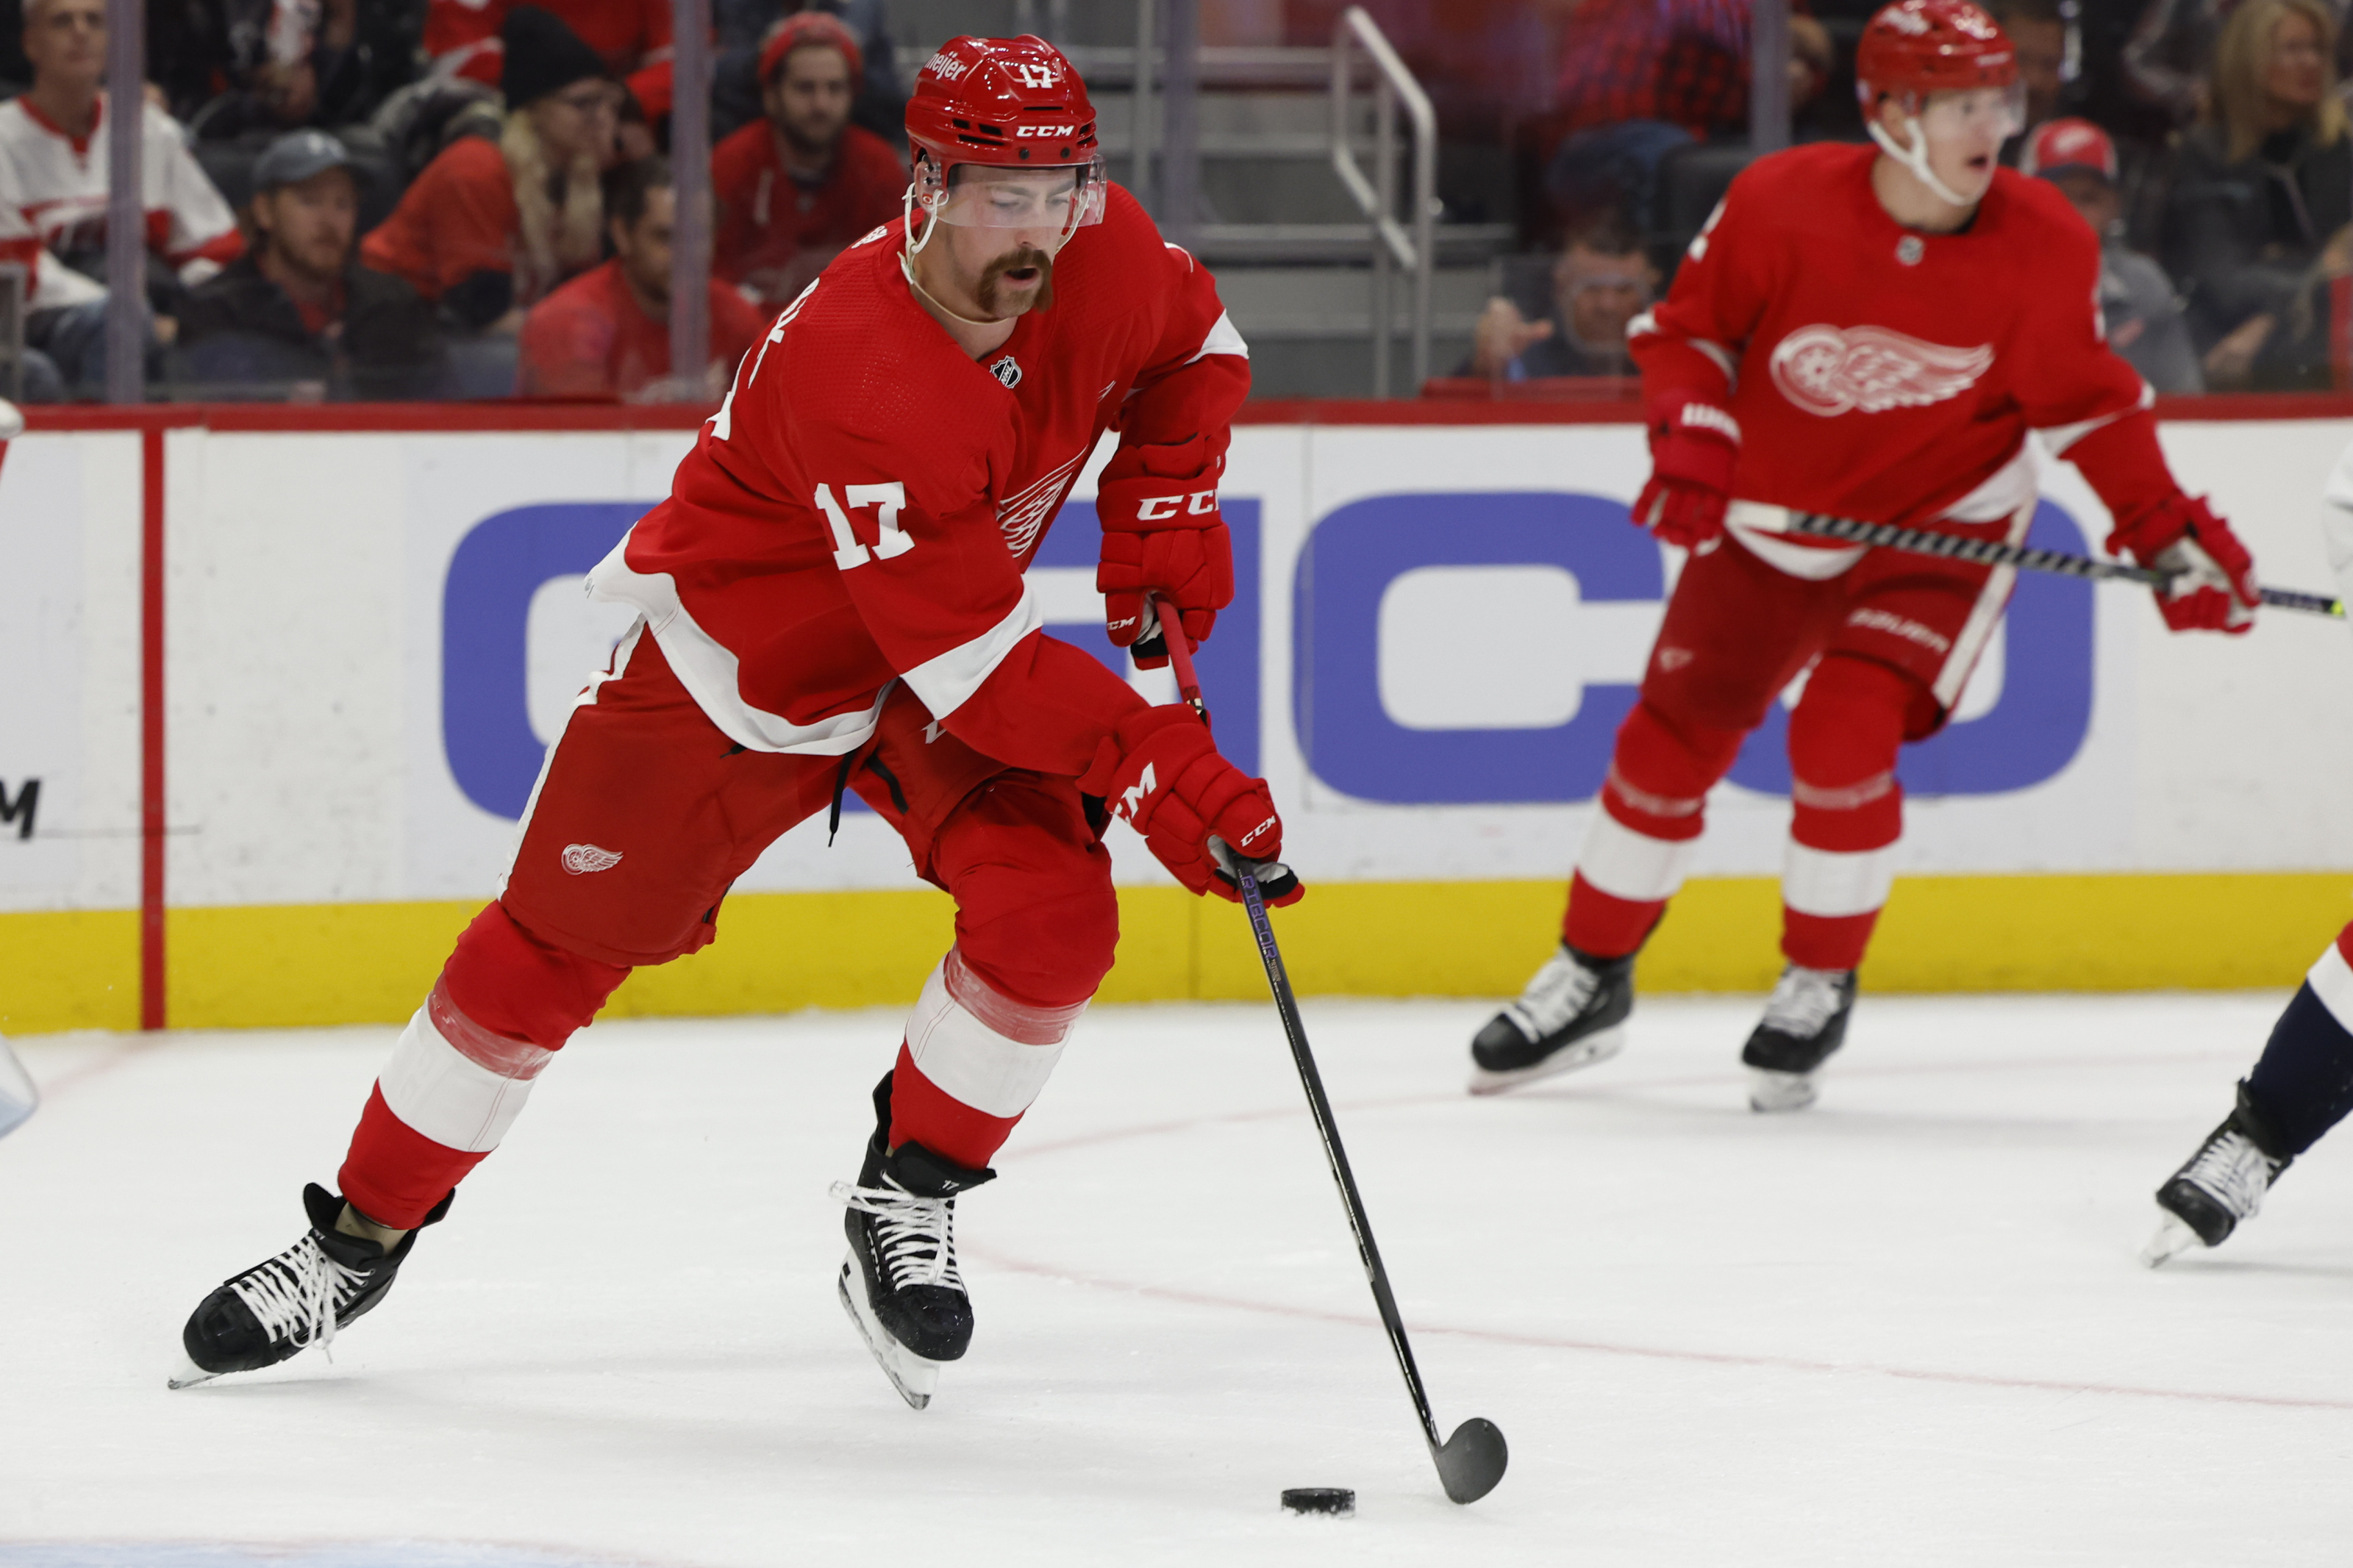 Detroit Red Wings want to manage emotions, set tone in home opener